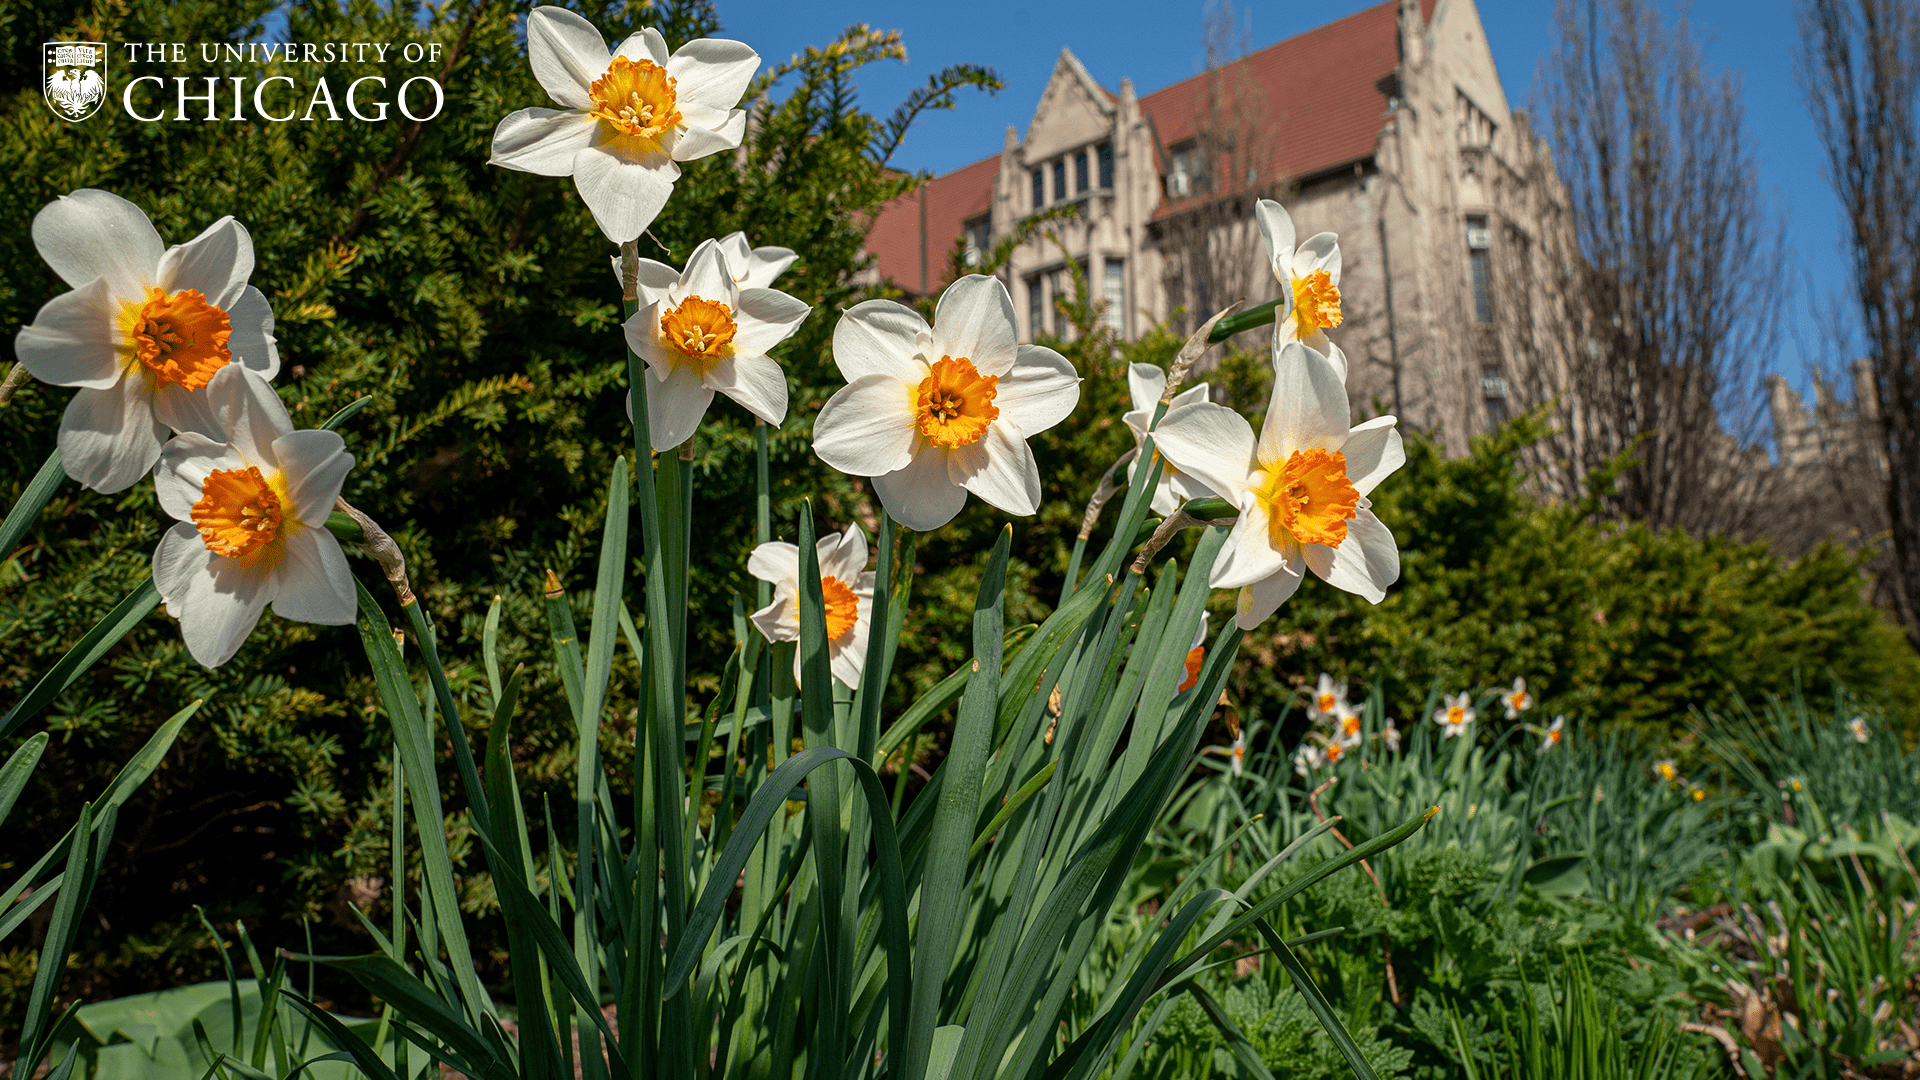 White daffodils against background greenery and gothic architecture